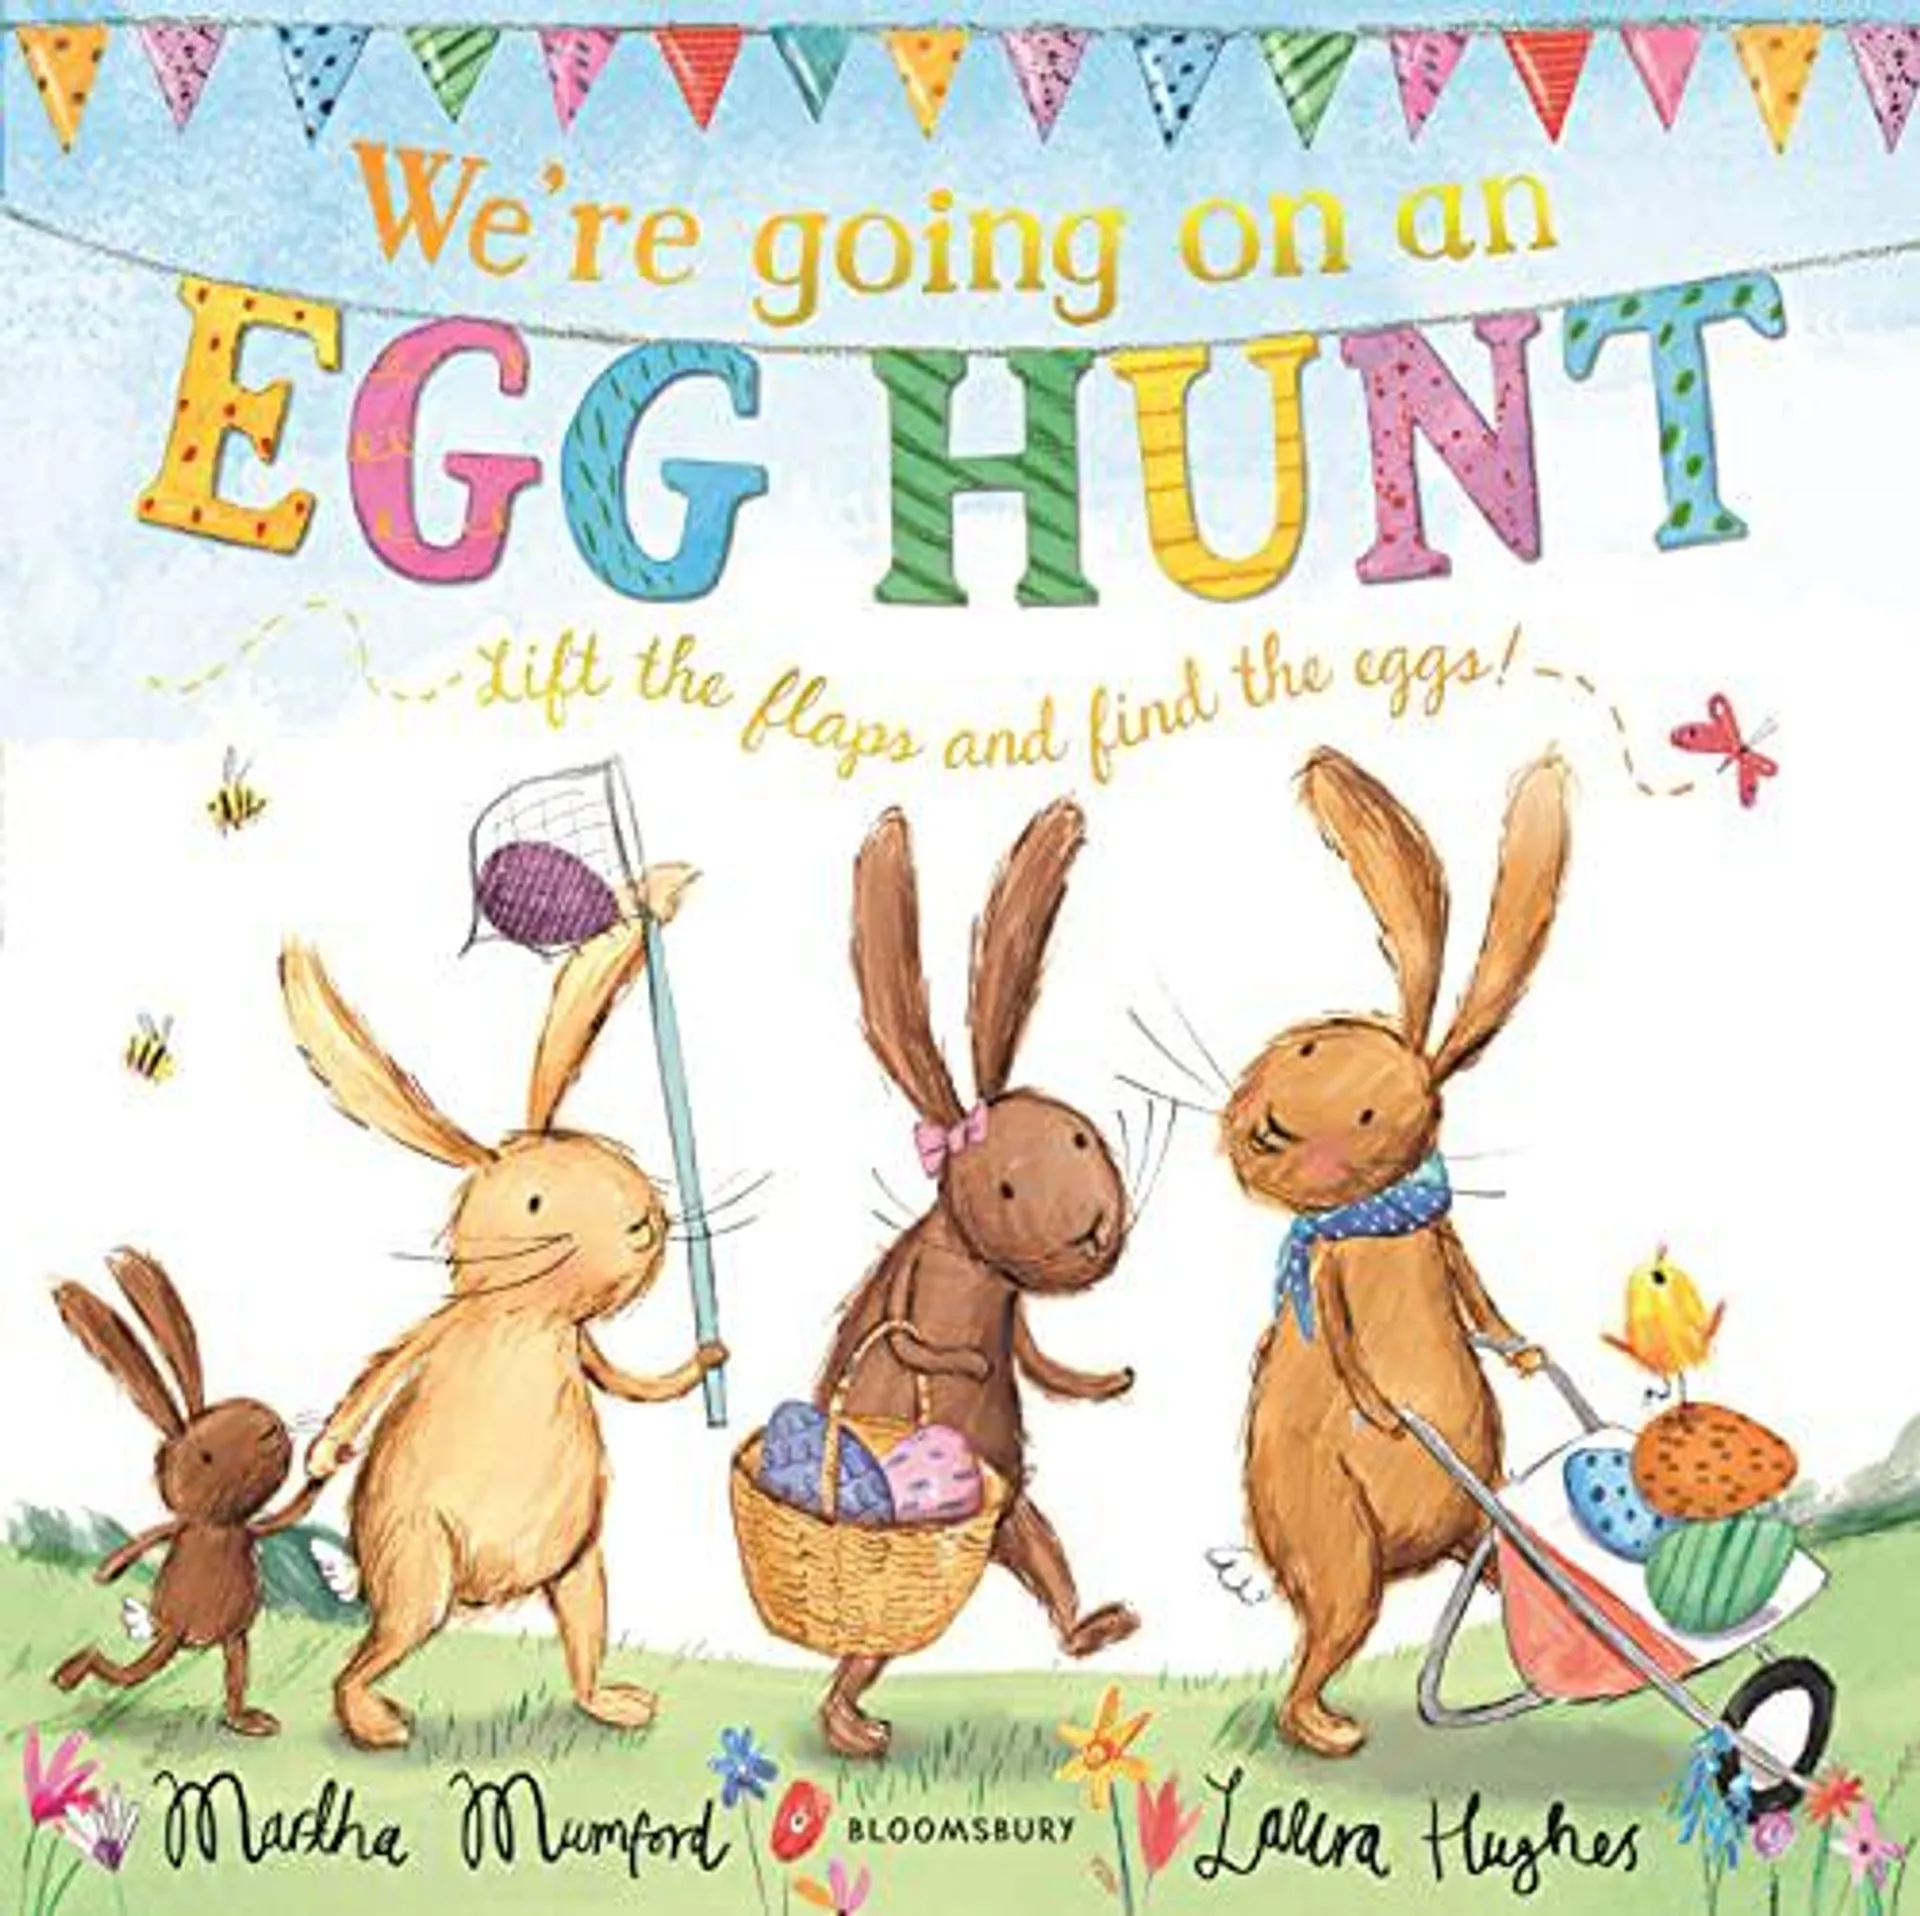 We're Going on an Egg Hunt by Martha Mumford